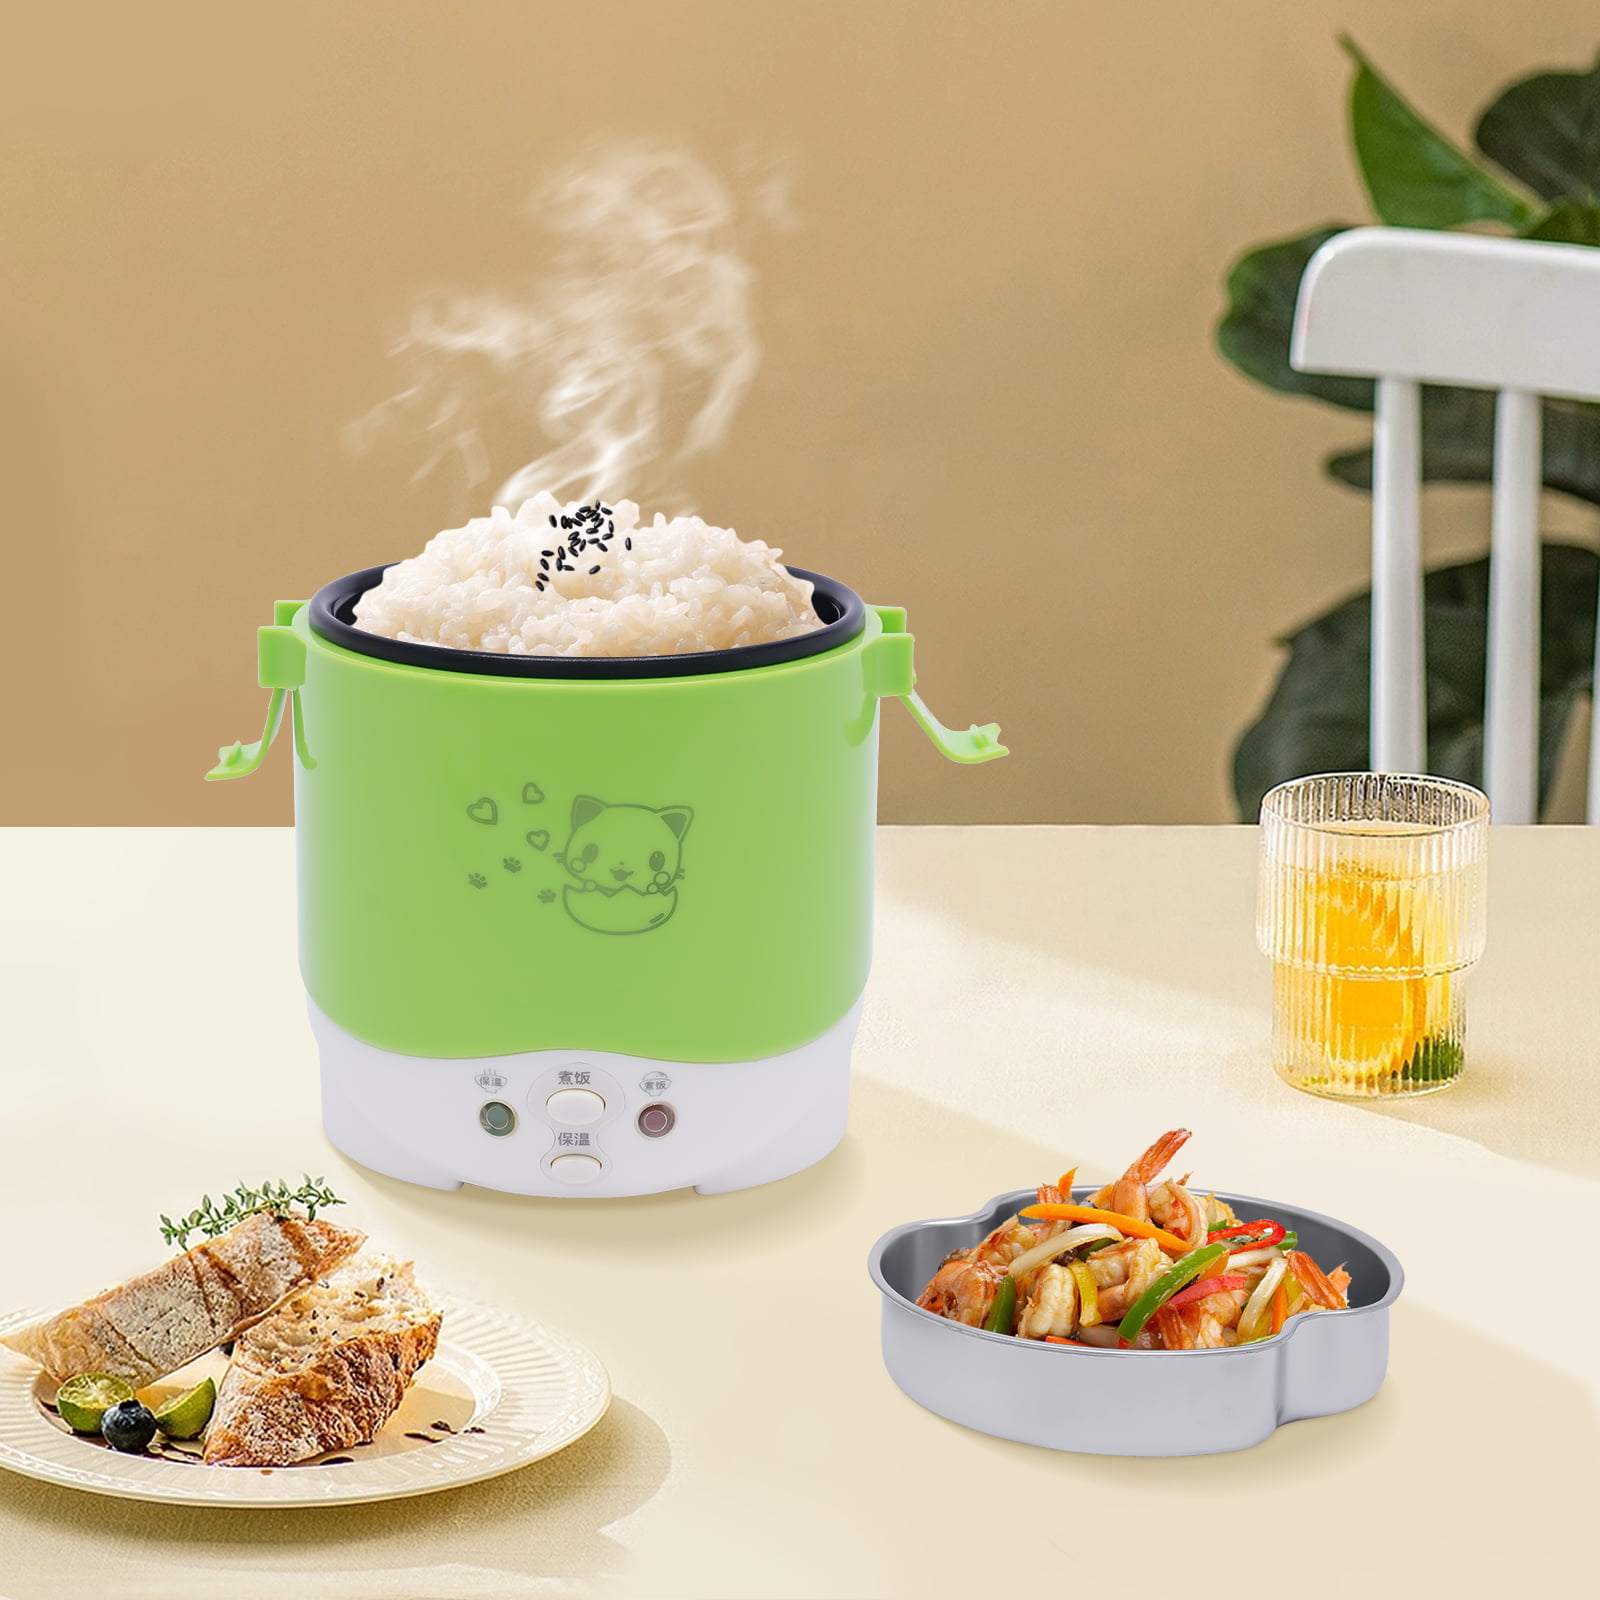 5 Core Rice Cooker Small Rice Maker Steamer Pot Electric Steamer Digital  Electric Rice Pot Multi Cooker & Food Steamer Warmer 5.3 Qt RC0501 